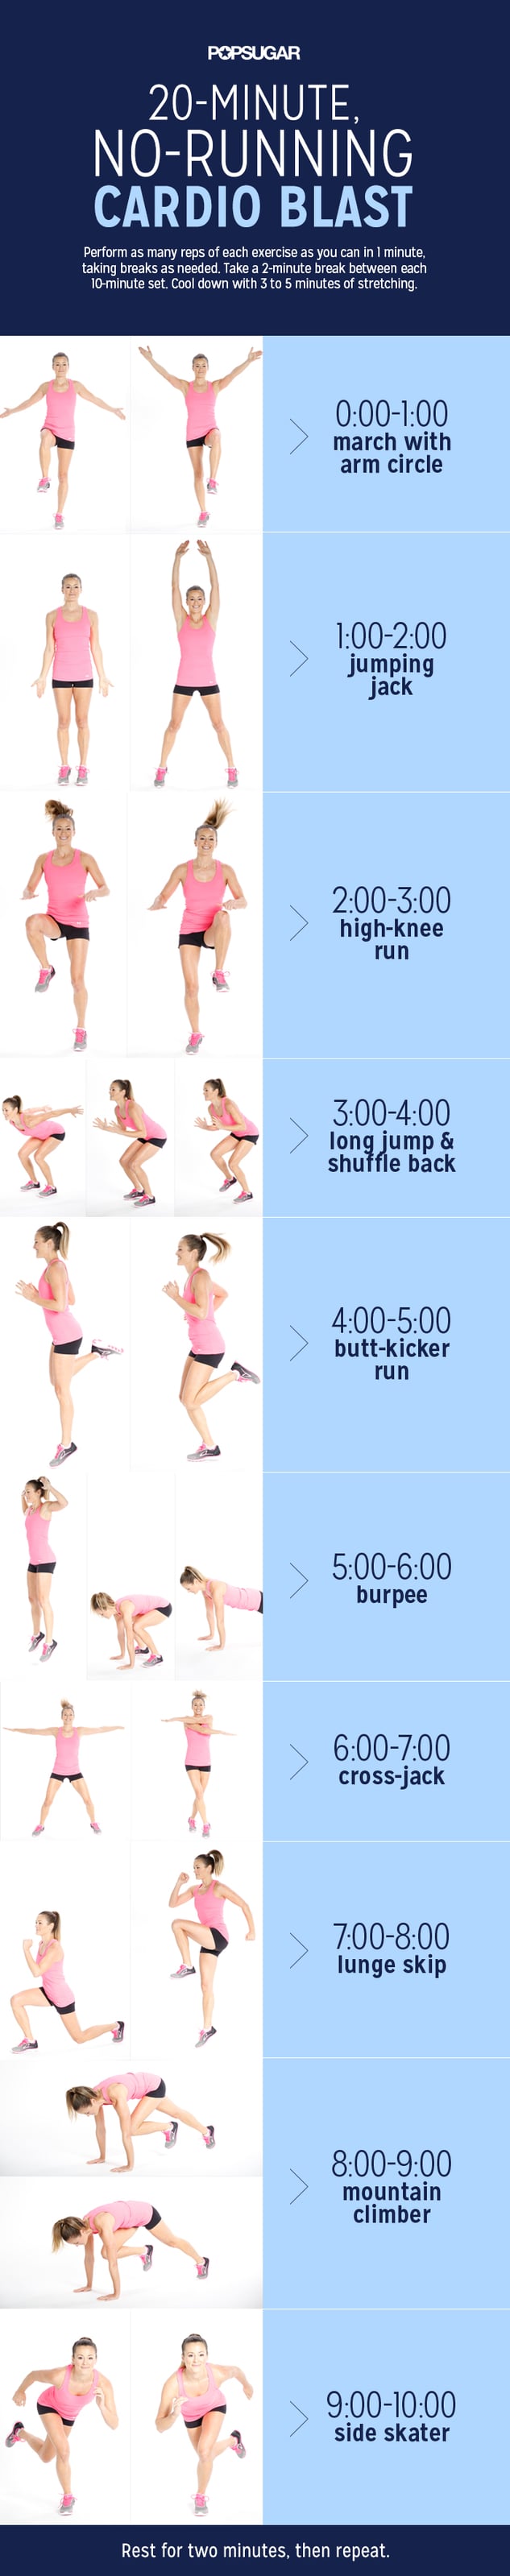 20-Minute Bodyweight BOOTY BLAST Workout - JUST ROW